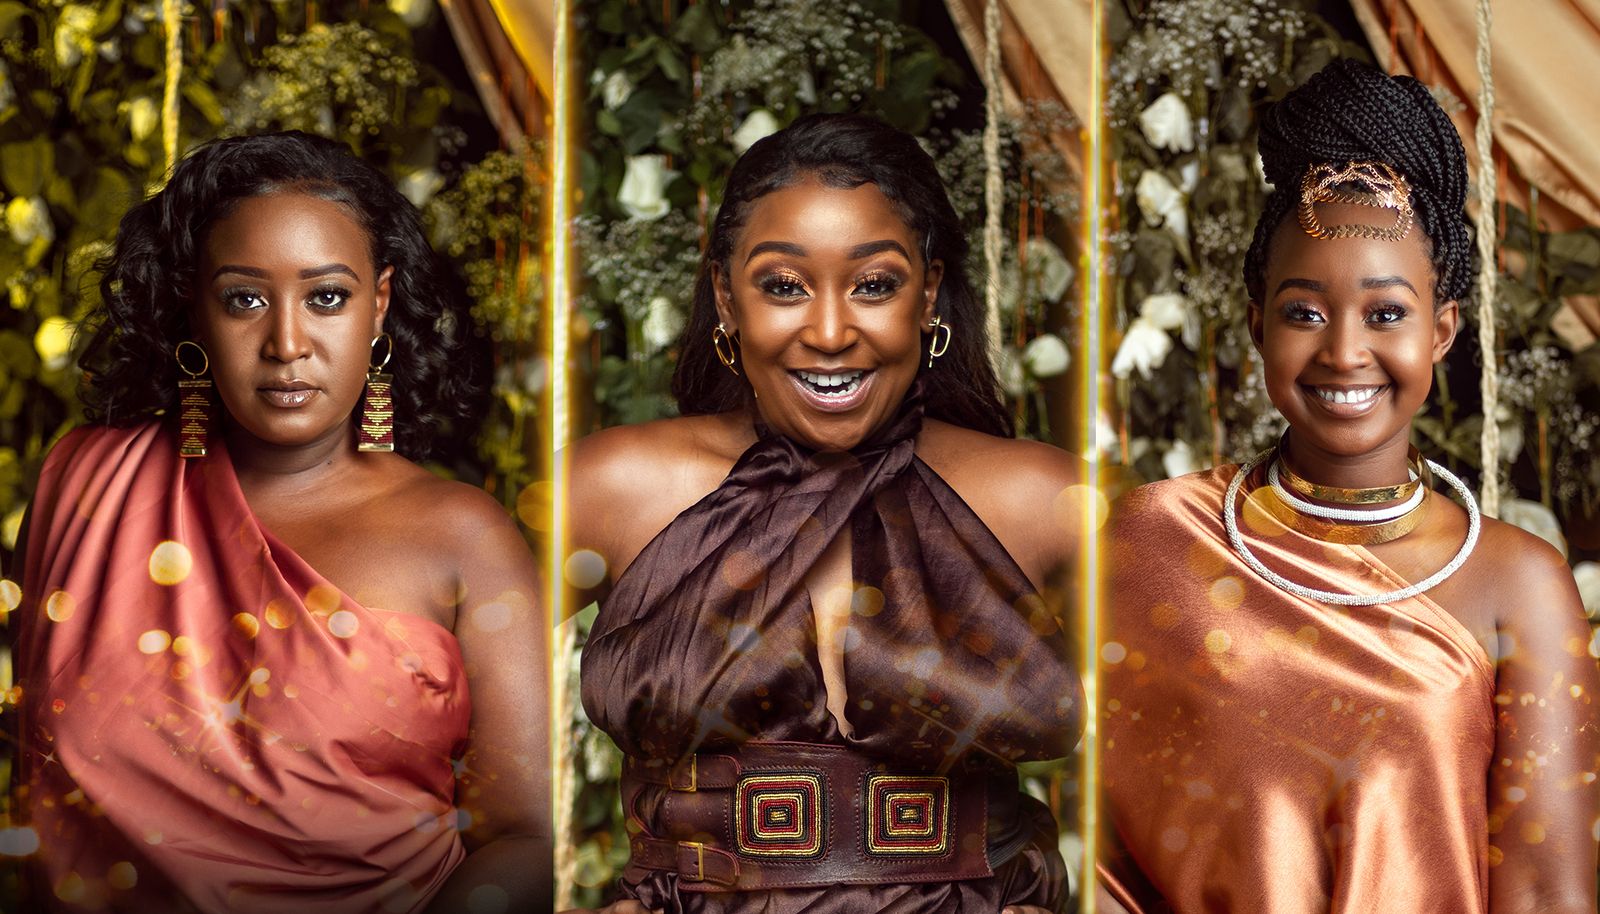 Betty Kyallo's Tell-all Reality Show "Kyallo Kulture" Now On Showmax